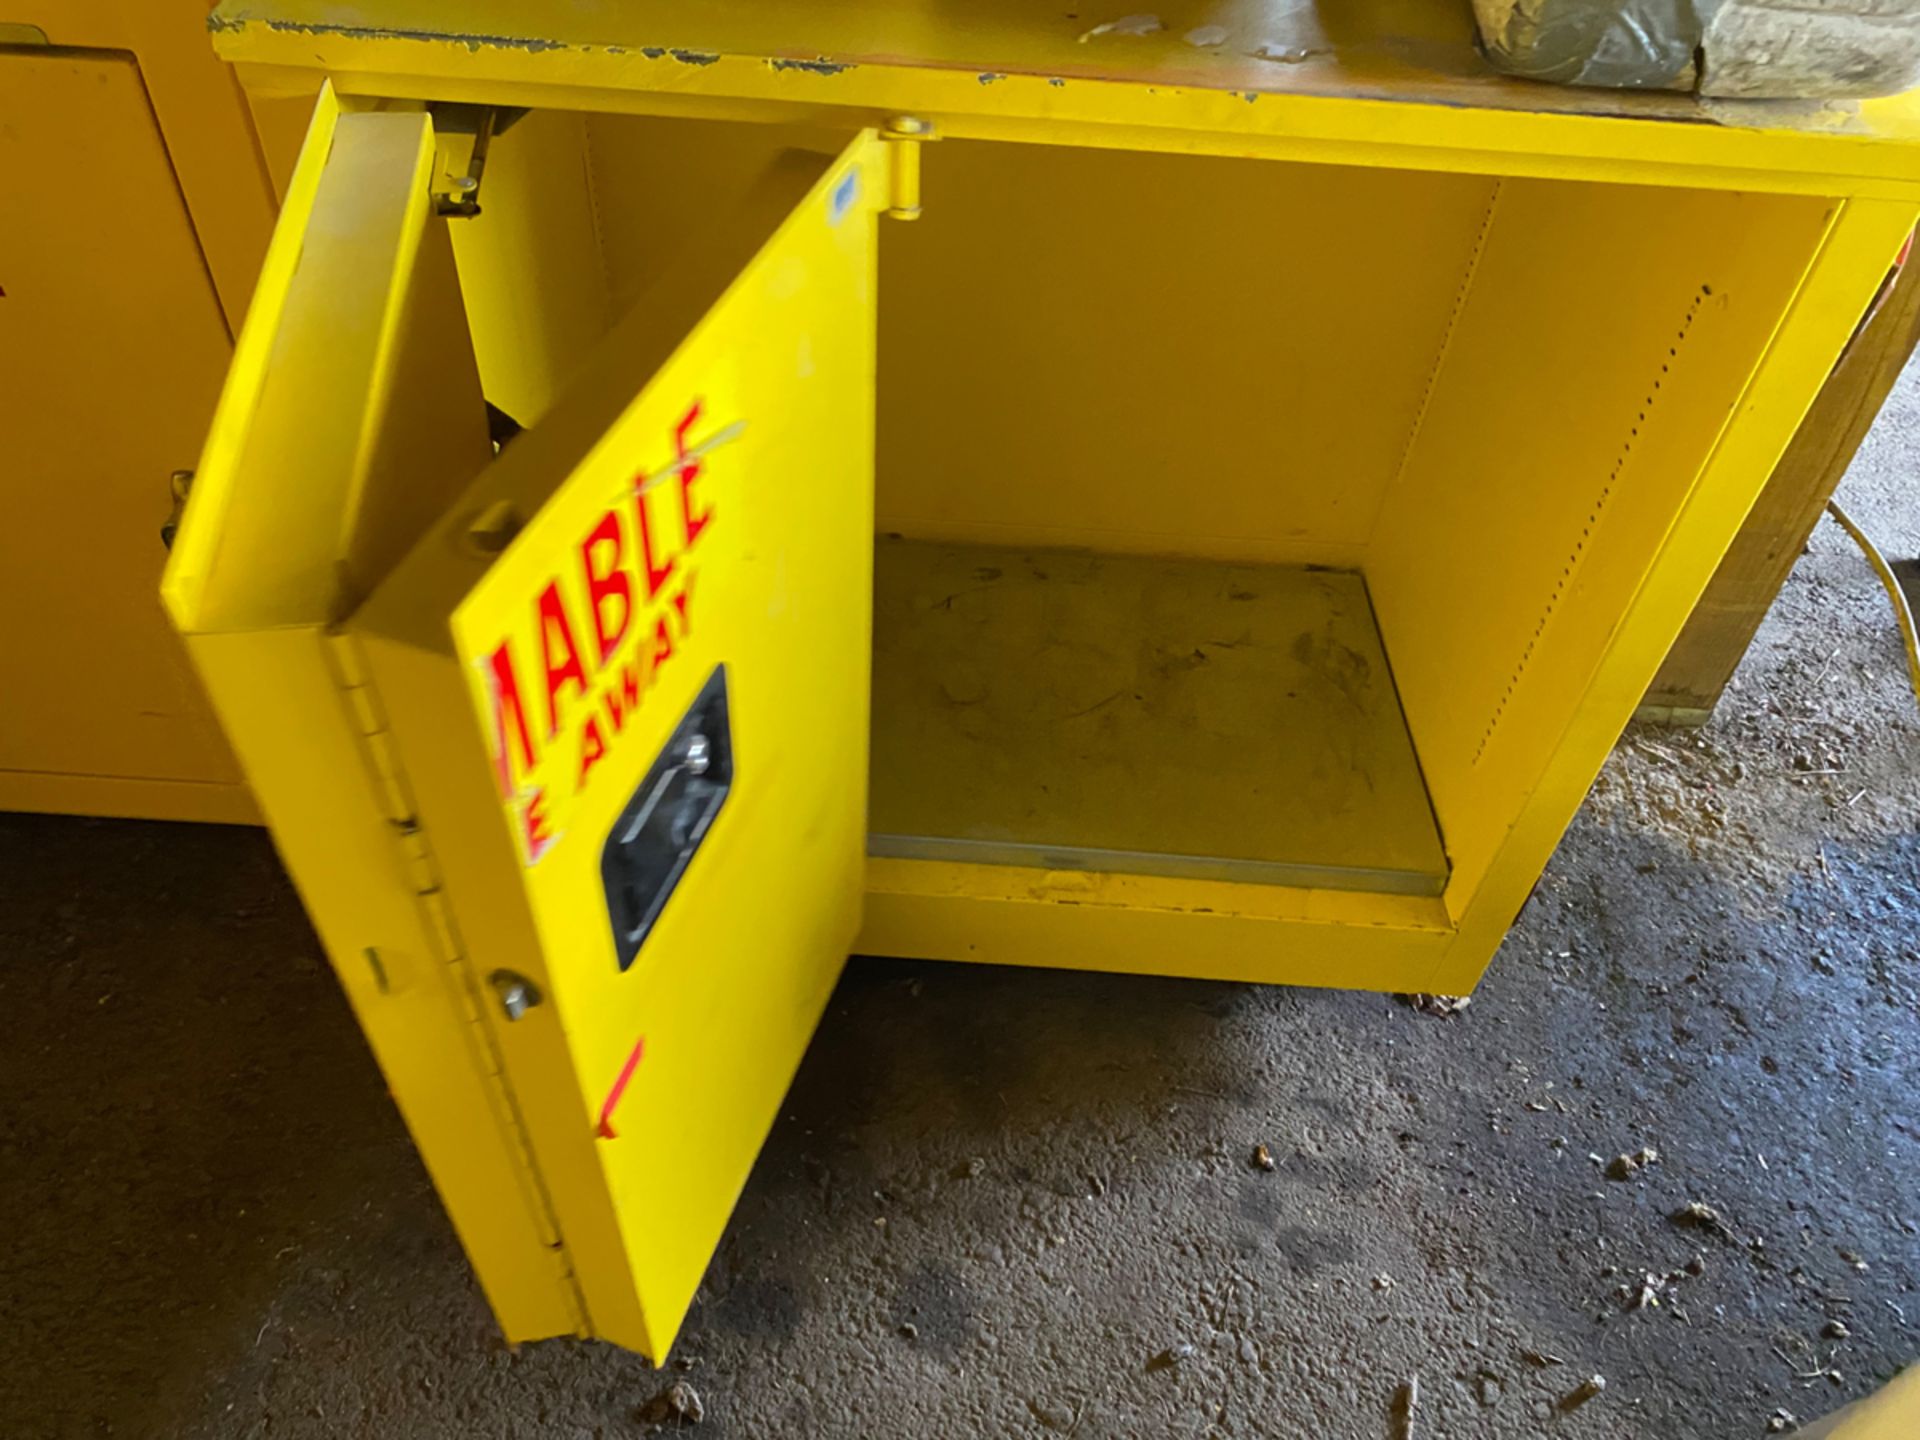 Flammable Liquid Safety Storage Cabinet - Image 2 of 4